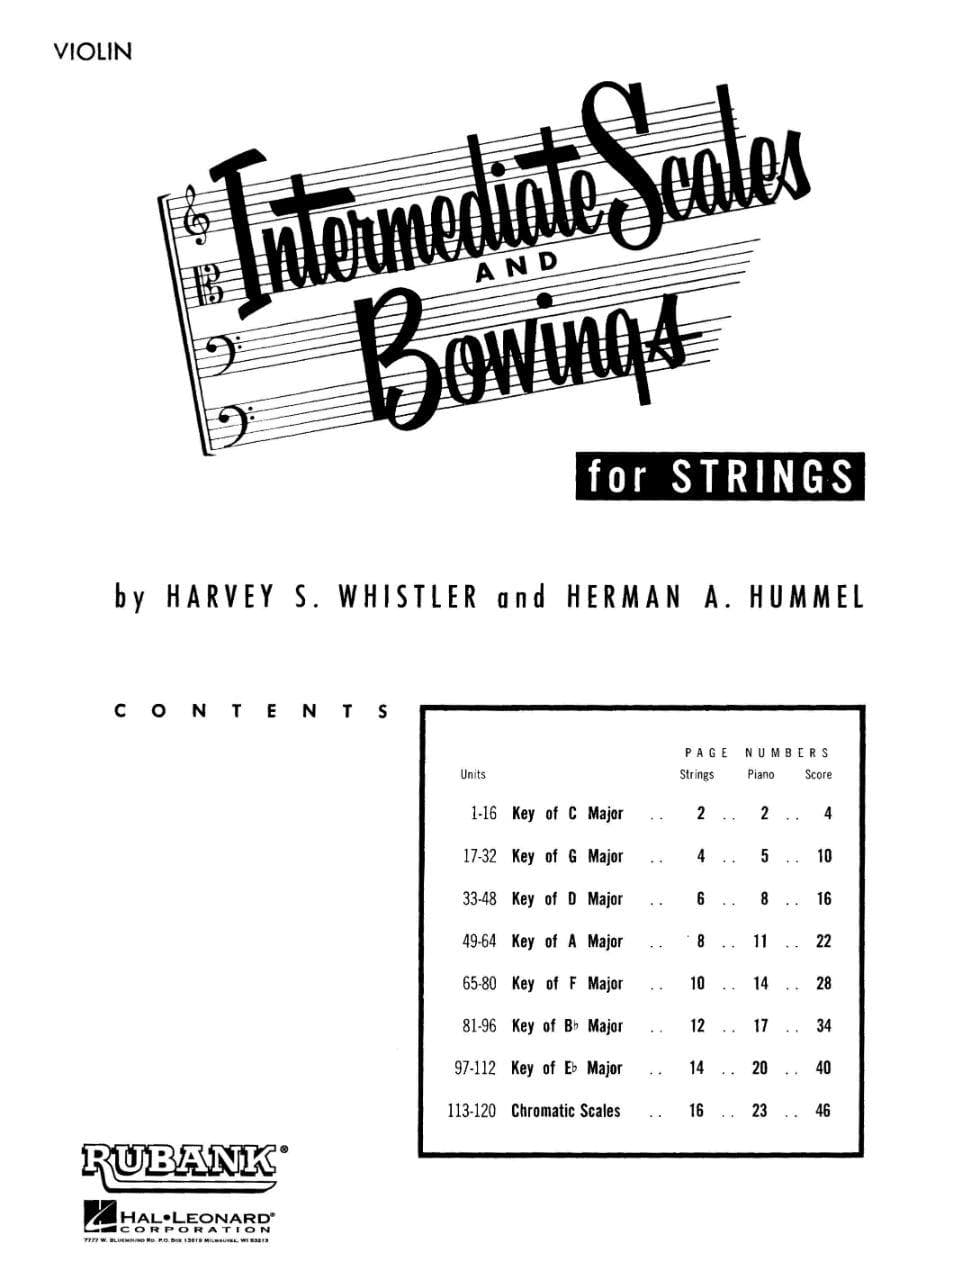 Whistler/Hummel - Intermediate Scales & Bowings, for Violin Published by Rubank Publications